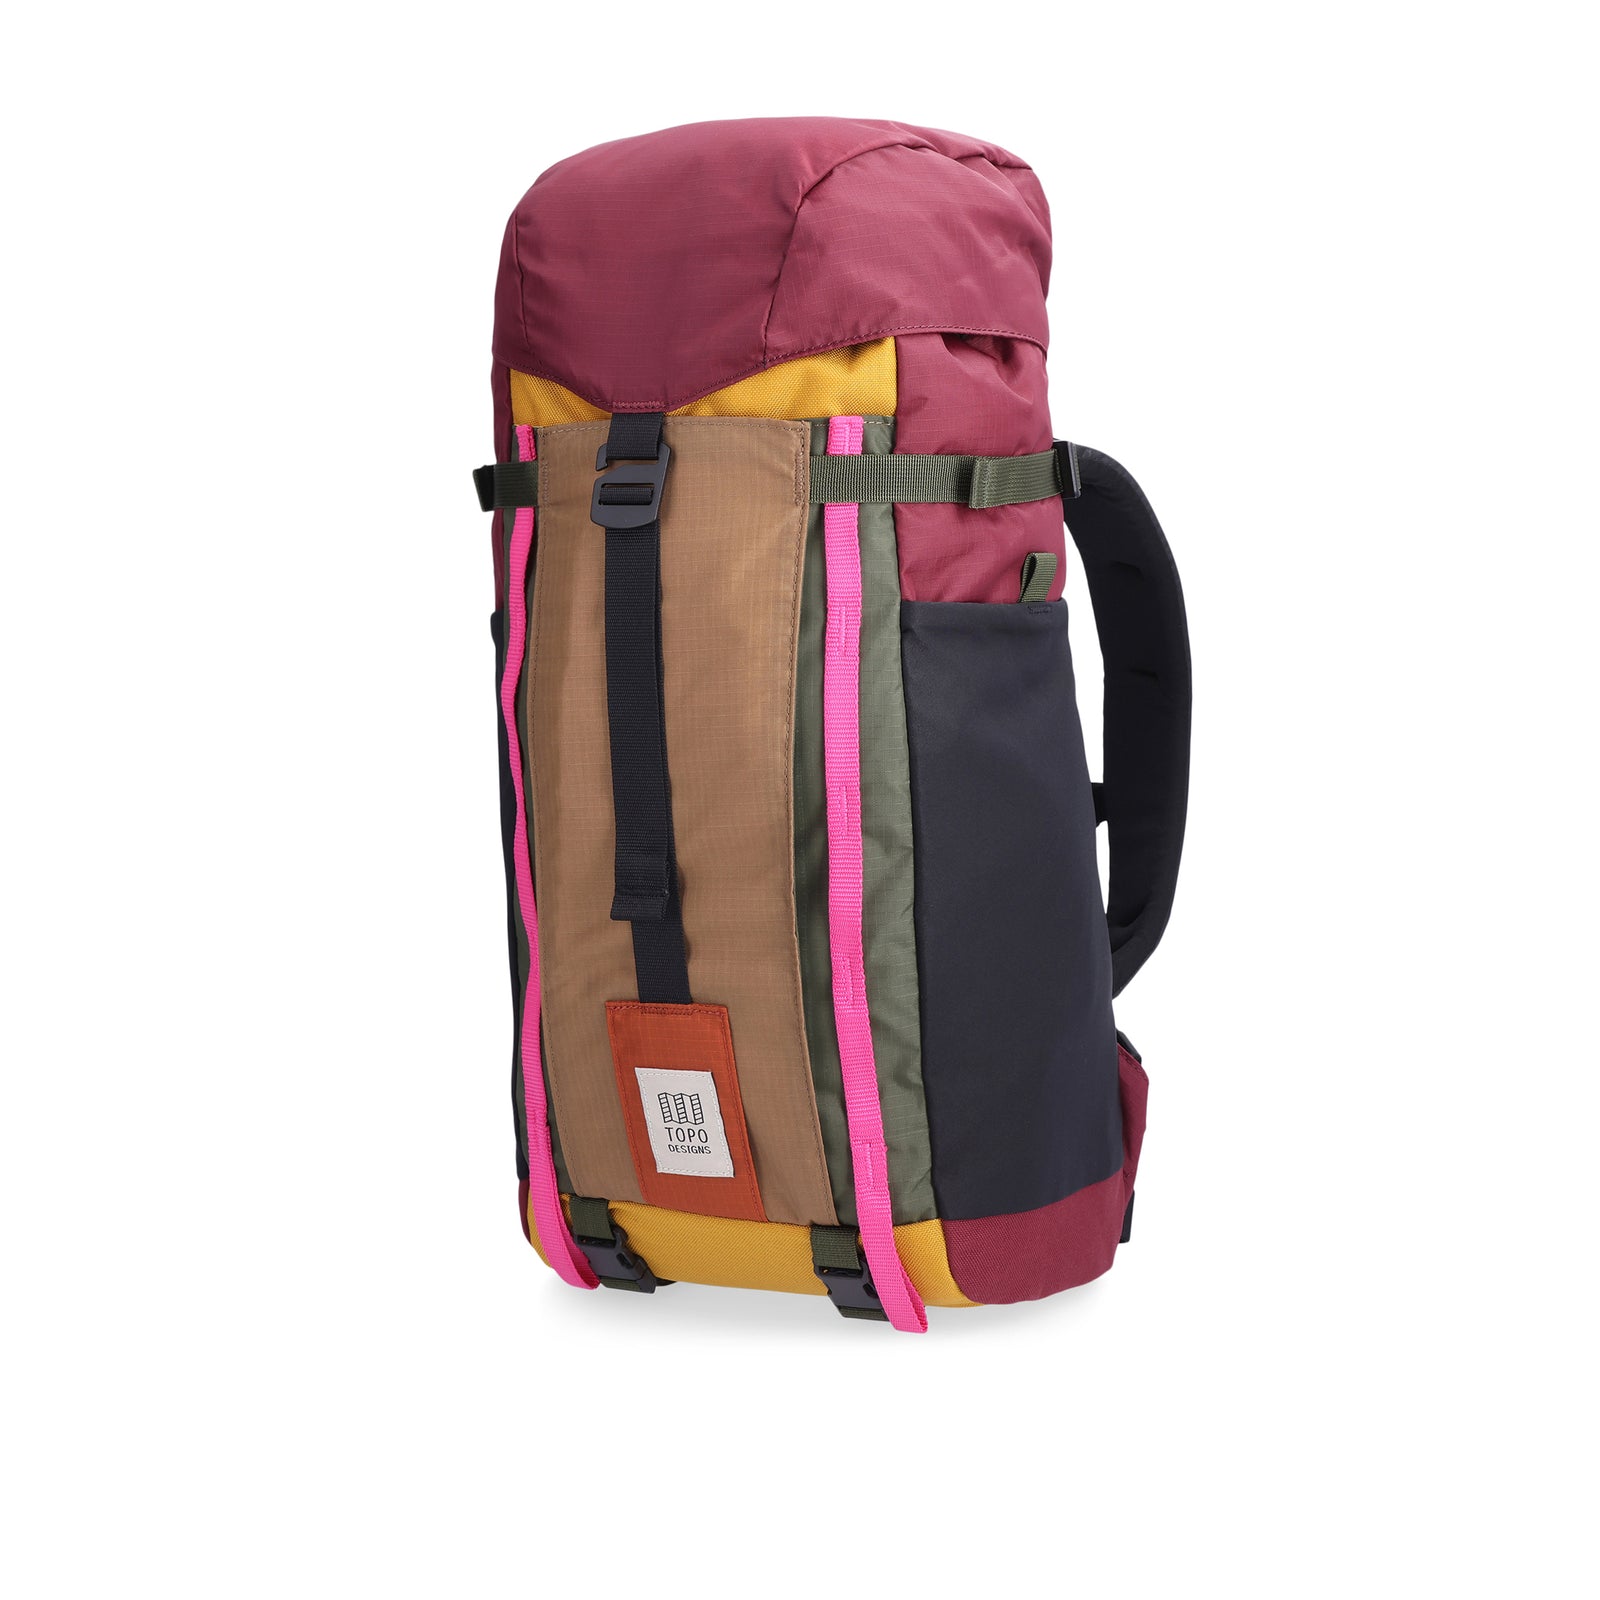 Side view of Topo Designs Mountain Pack 16L hiking backpack with internal laptop sleeve in lightweight recycled nylon "Burgundy / Dark Khaki".